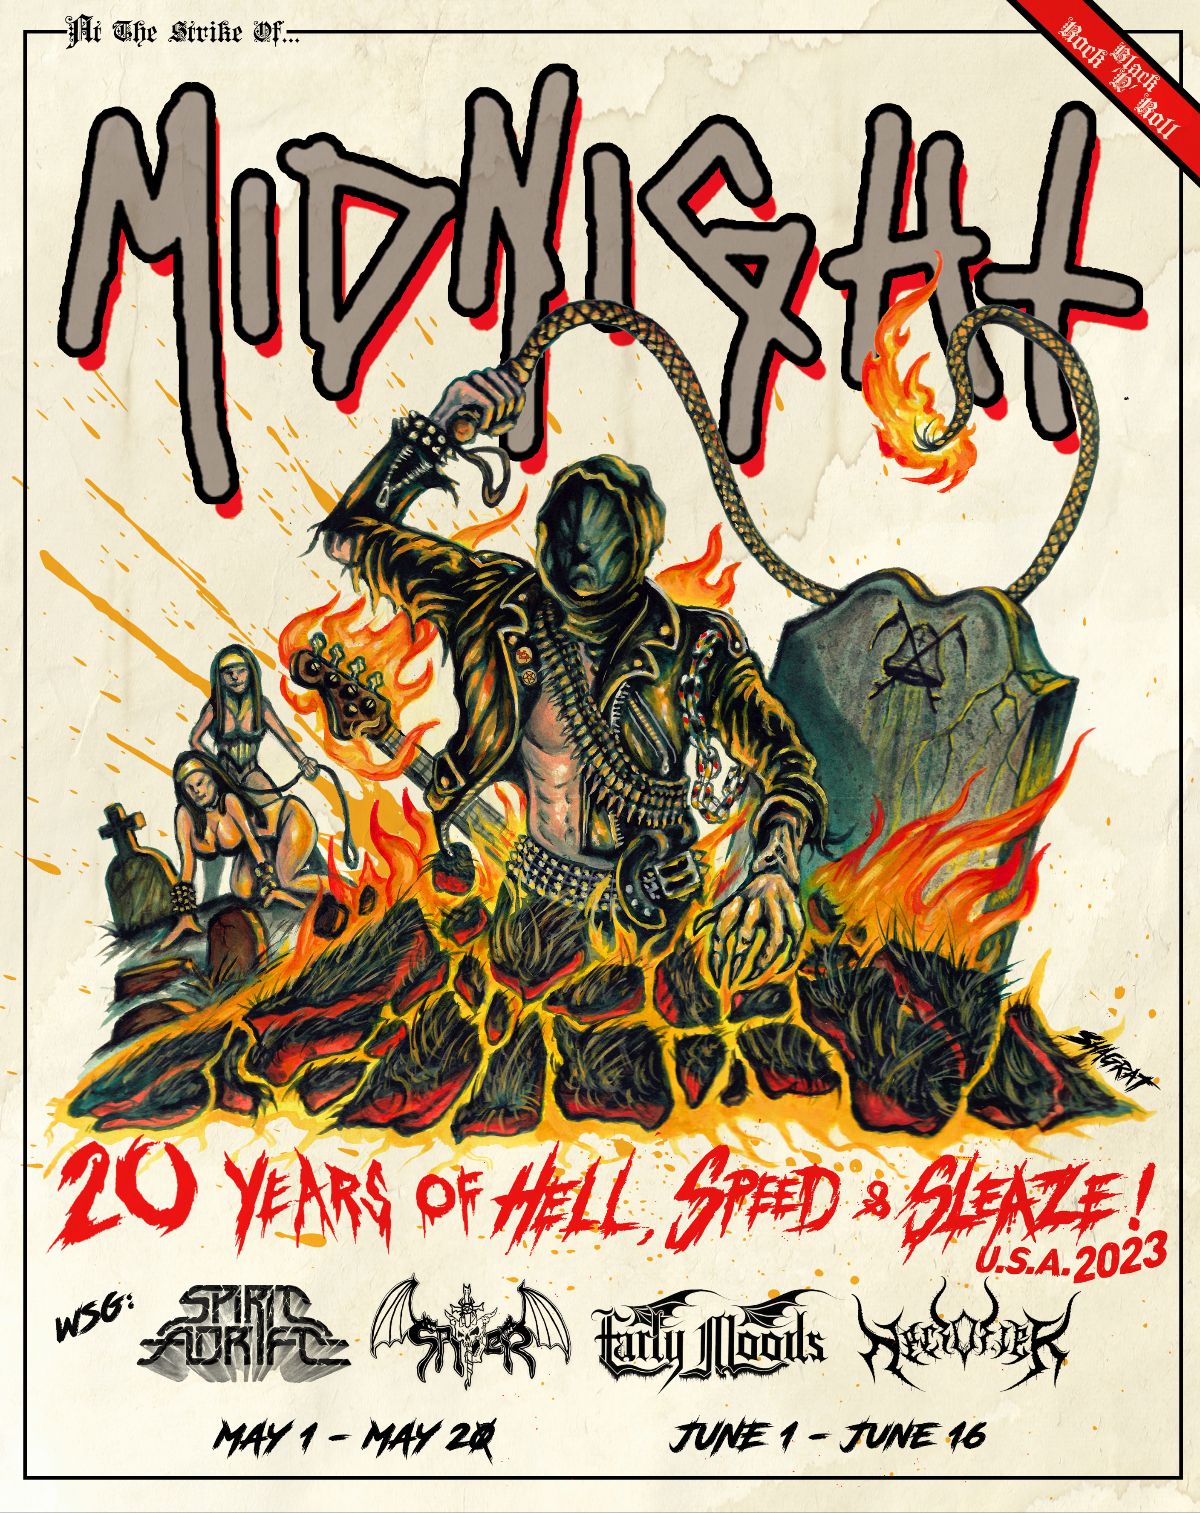 Midnight “20 Years of Sleaze” 2023 tour poster